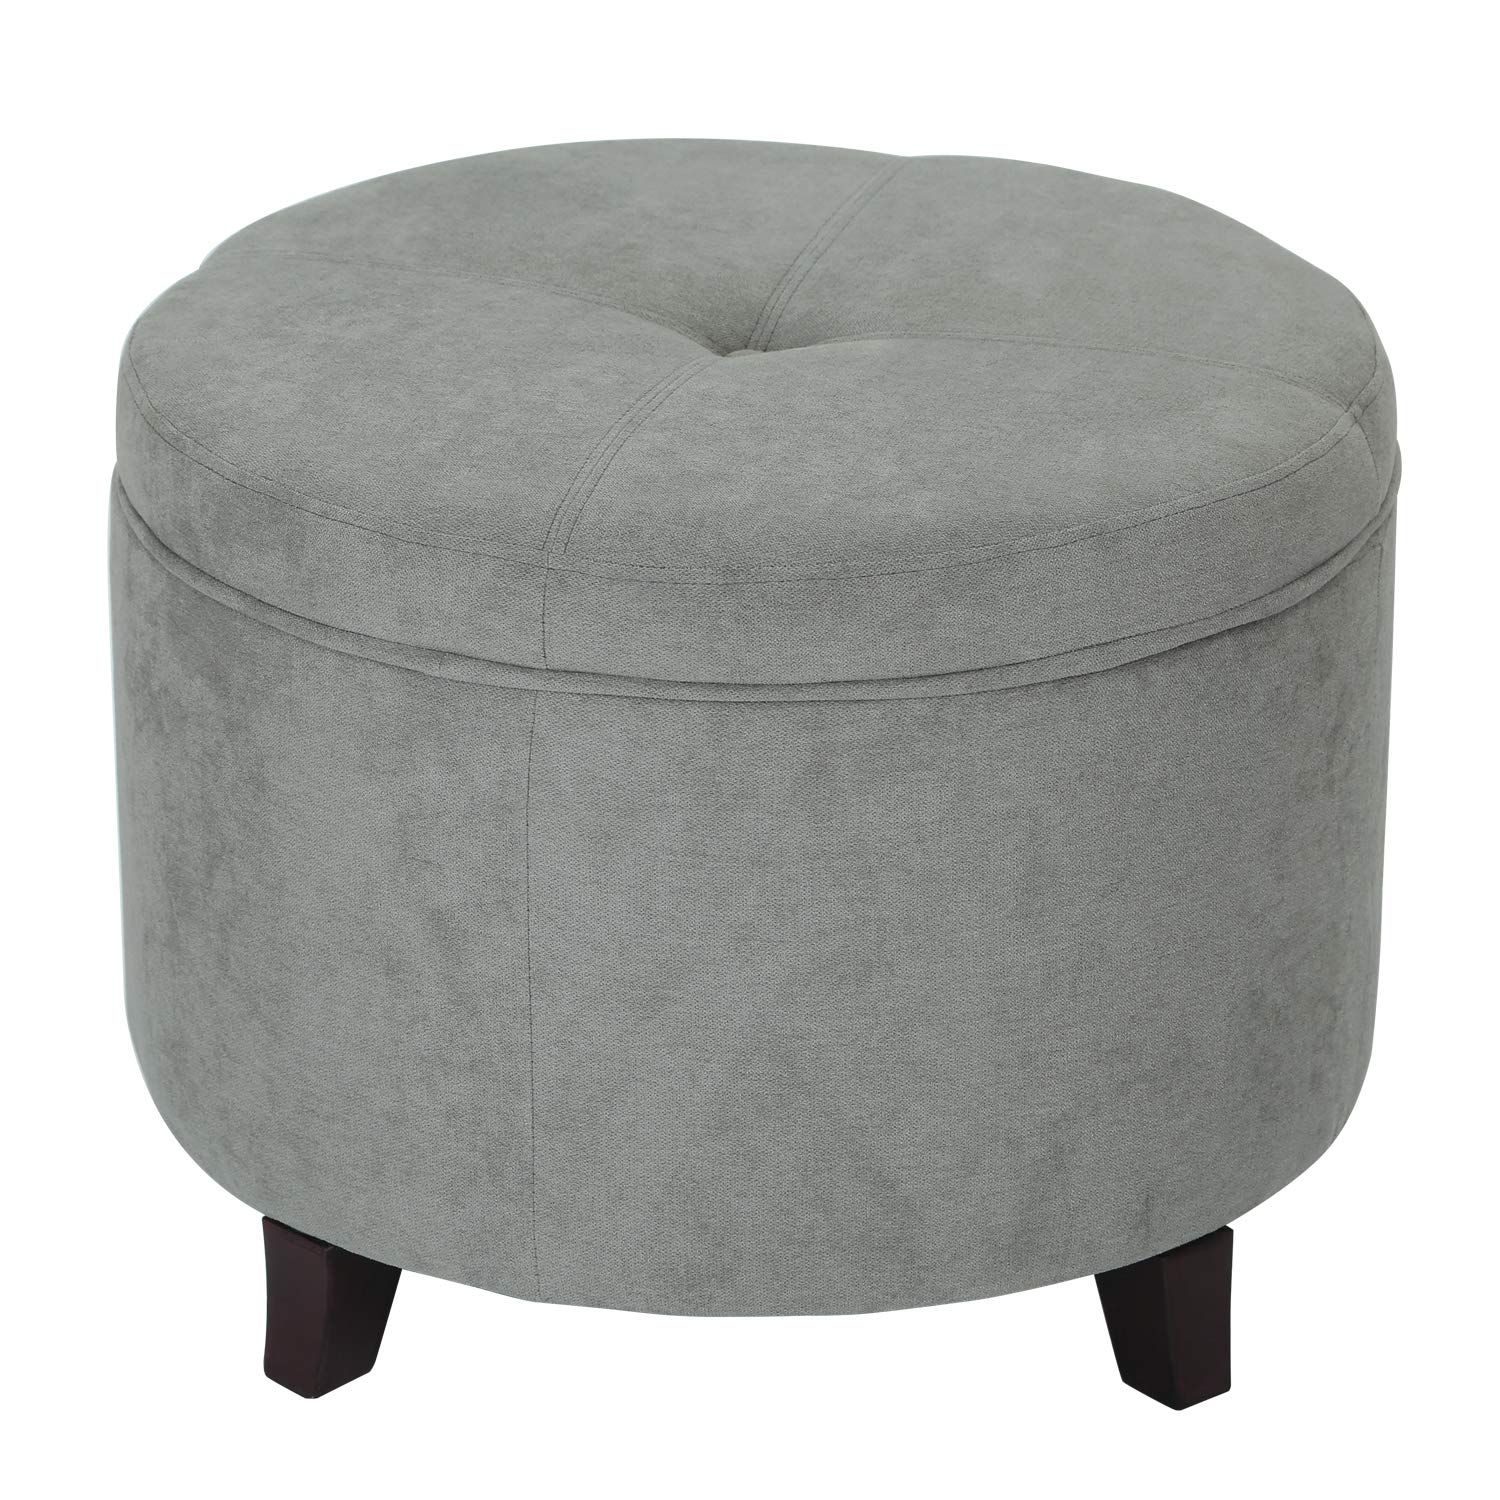 Adeco Round Ottoman, Fabric Foot Rest And Seat, Modern Button Tufted Within Gray And White Fabric Ottomans With Wooden Base (View 5 of 17)